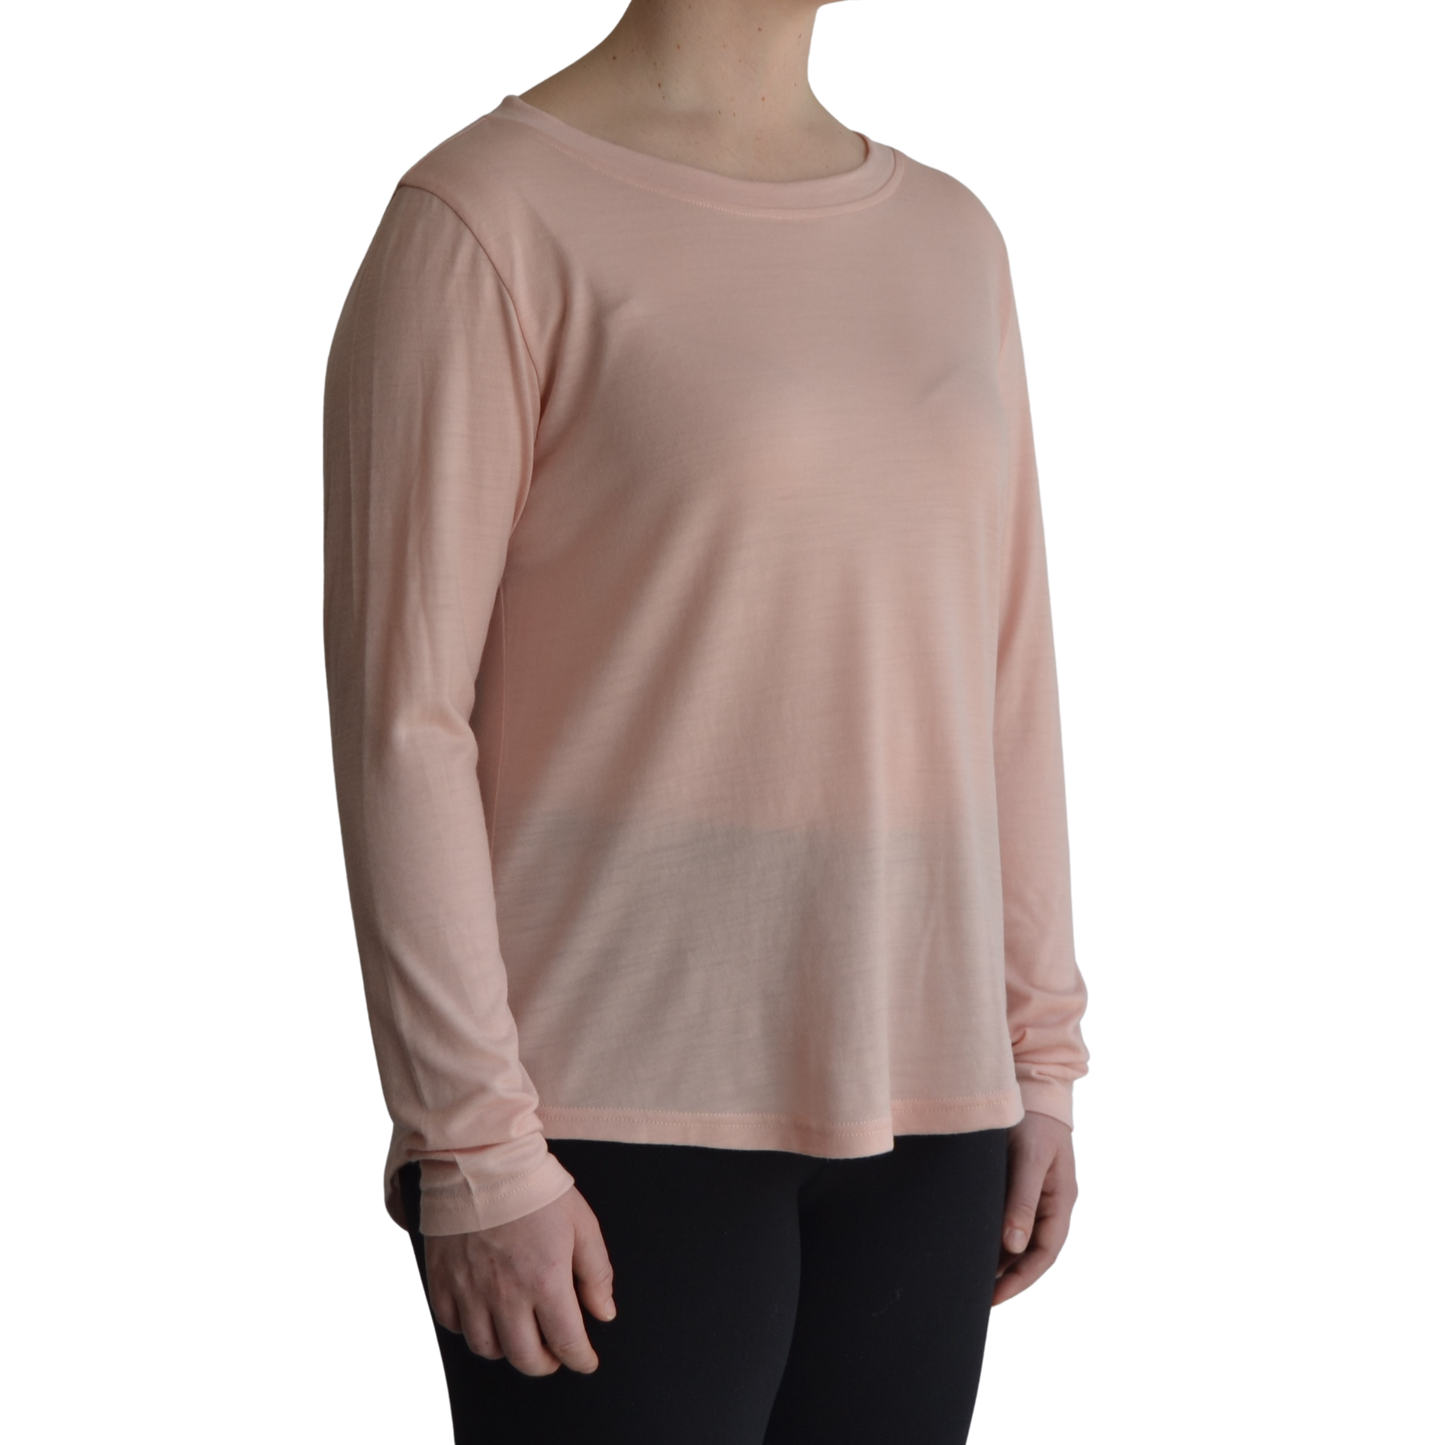 Links long sleeve merino top inpetal light pink colour. The model is standing on 45 degree angle facing forward